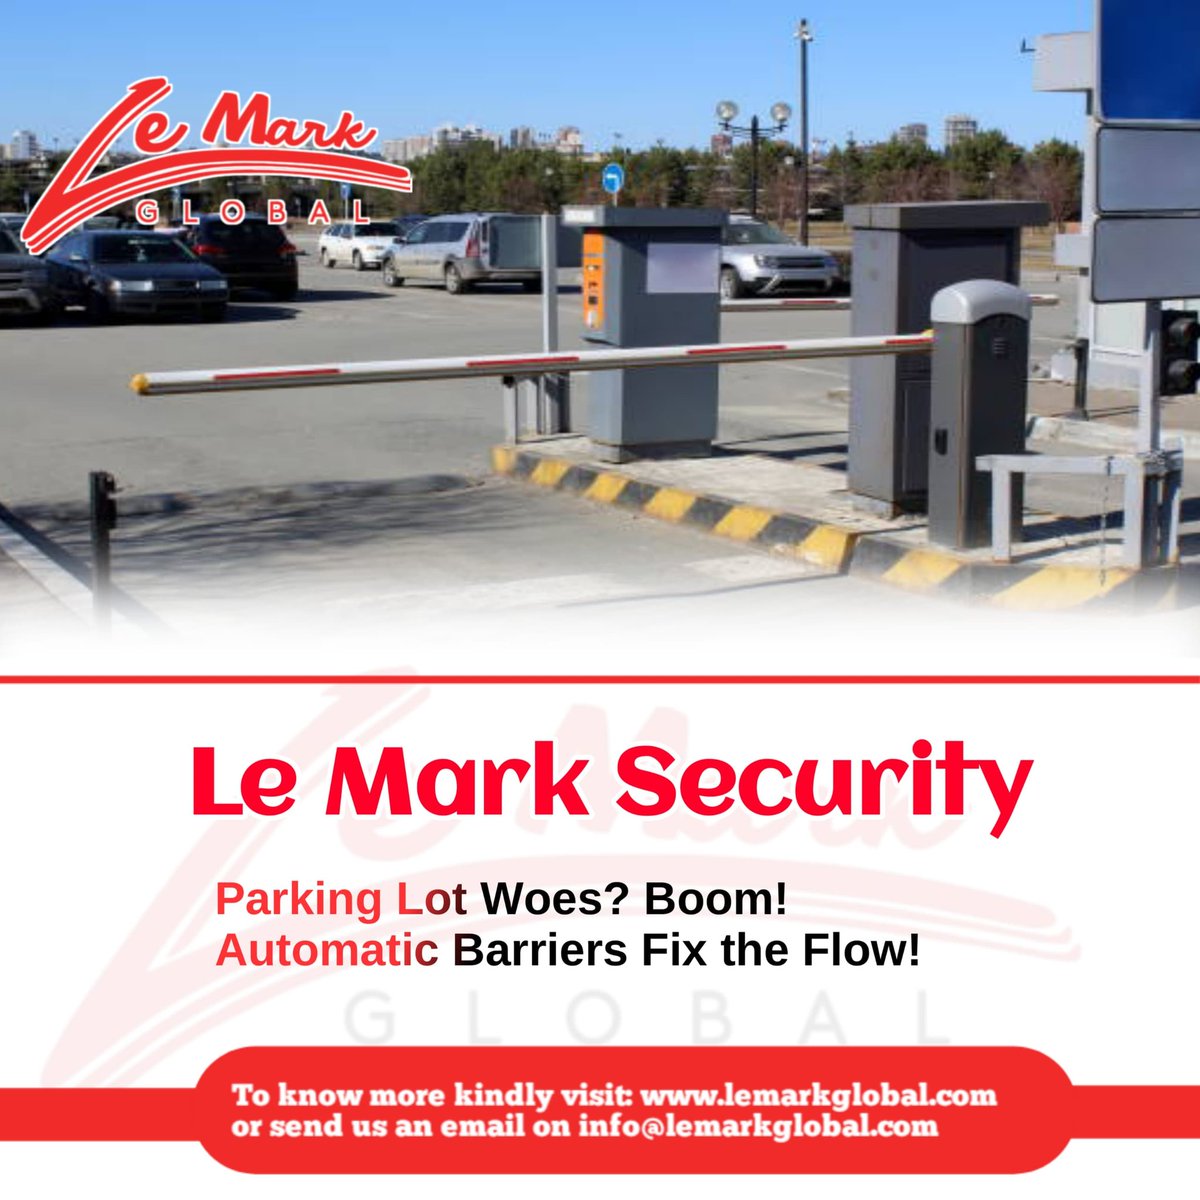 Get started – Click your way in!
lemarkglobal.com

#automaticboombarrier #parkinglotbarrier #securitygate #accesscontrolsystem #securitybarrier #parkingsecurity #boomgatesystem #carparkbarrier #securitysolution #entrysystem #automaticboombarrierforgatedcommunities